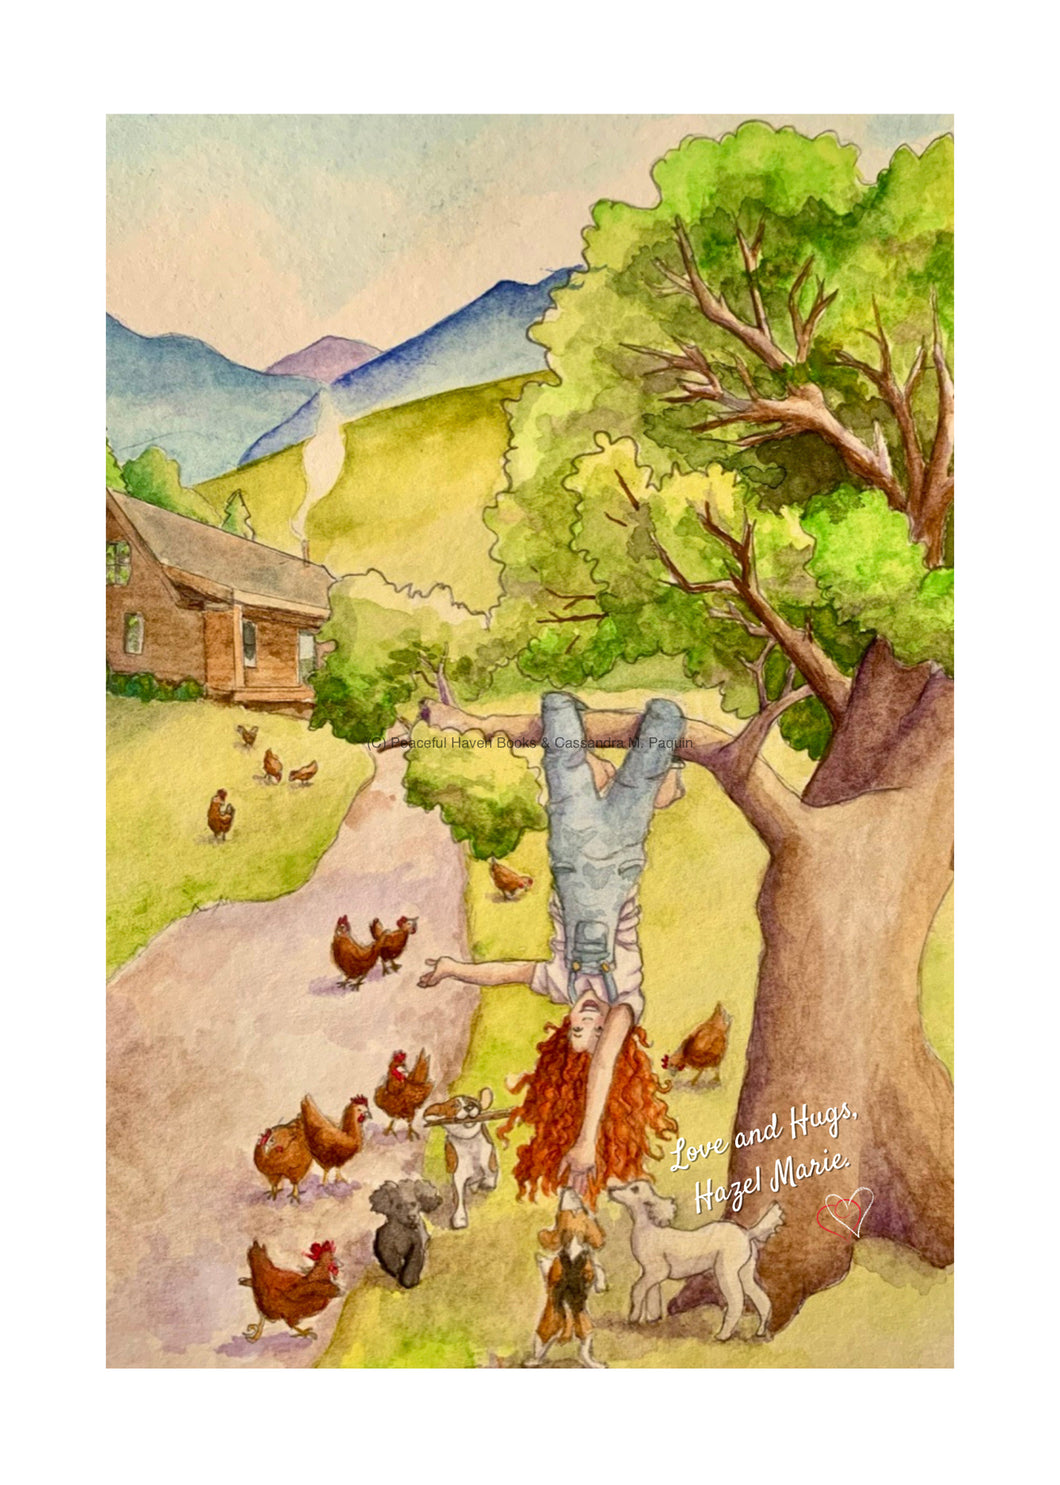 Our little friend, Hazel Marie enjoys climbing trees, playing outdoors in the fresh New Hampshire mountain air with her animal friends at Peaceful Haven Cabin! Just Hanging Around is a 5x7 art print from the illustrations in the book, It’s Me, Hazel Marie! by author Cassandra M. Paquin. The illustrations are by illustrator, Amanda Cotten and focus on a child just being a child in wholesome, uplifting stories that are perfect for ages 6 through 106! Perfect for matting and framing!